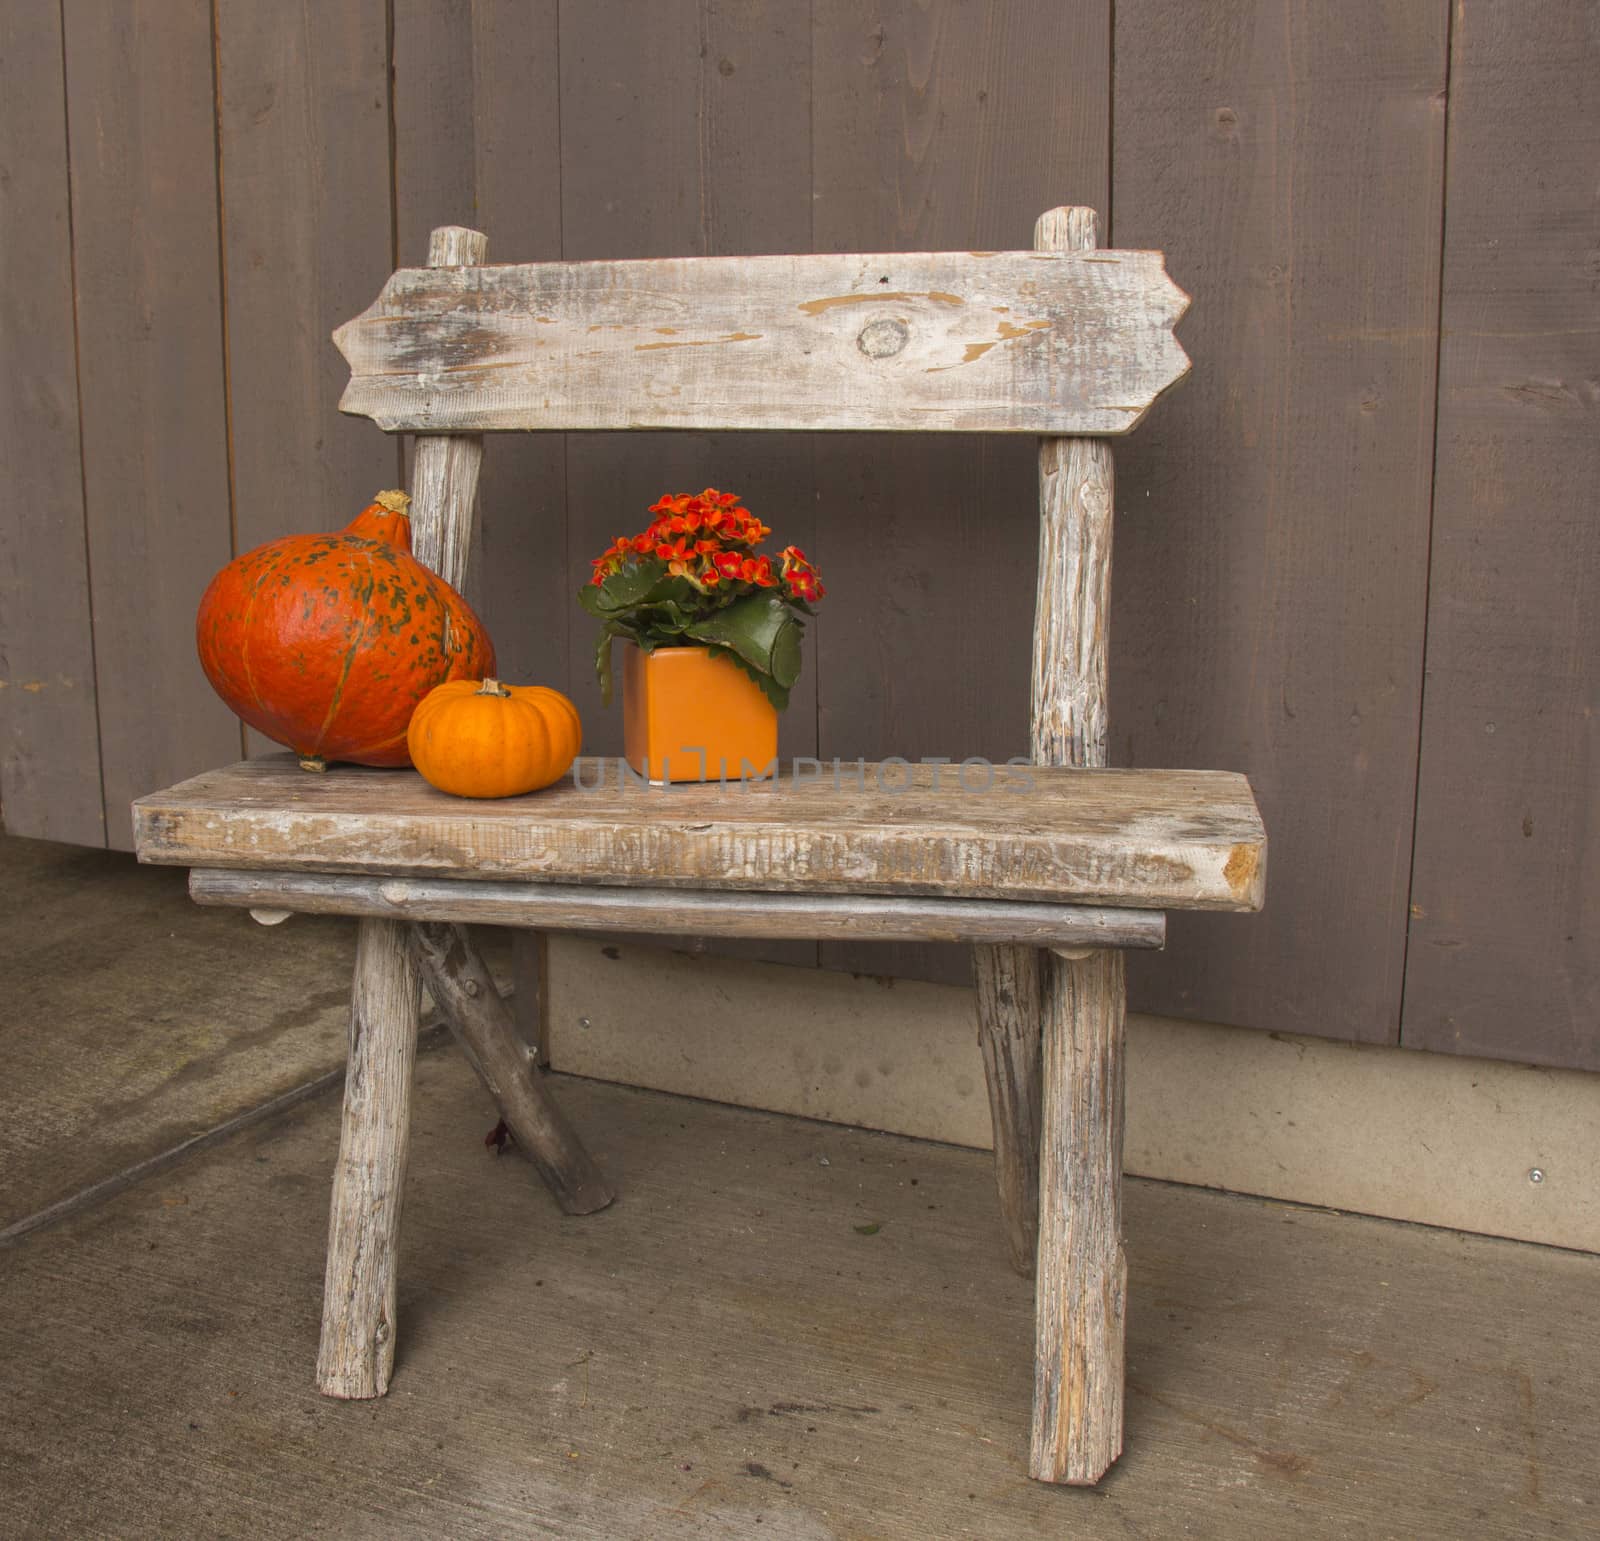 Small bench with pumpkin and flower decorations